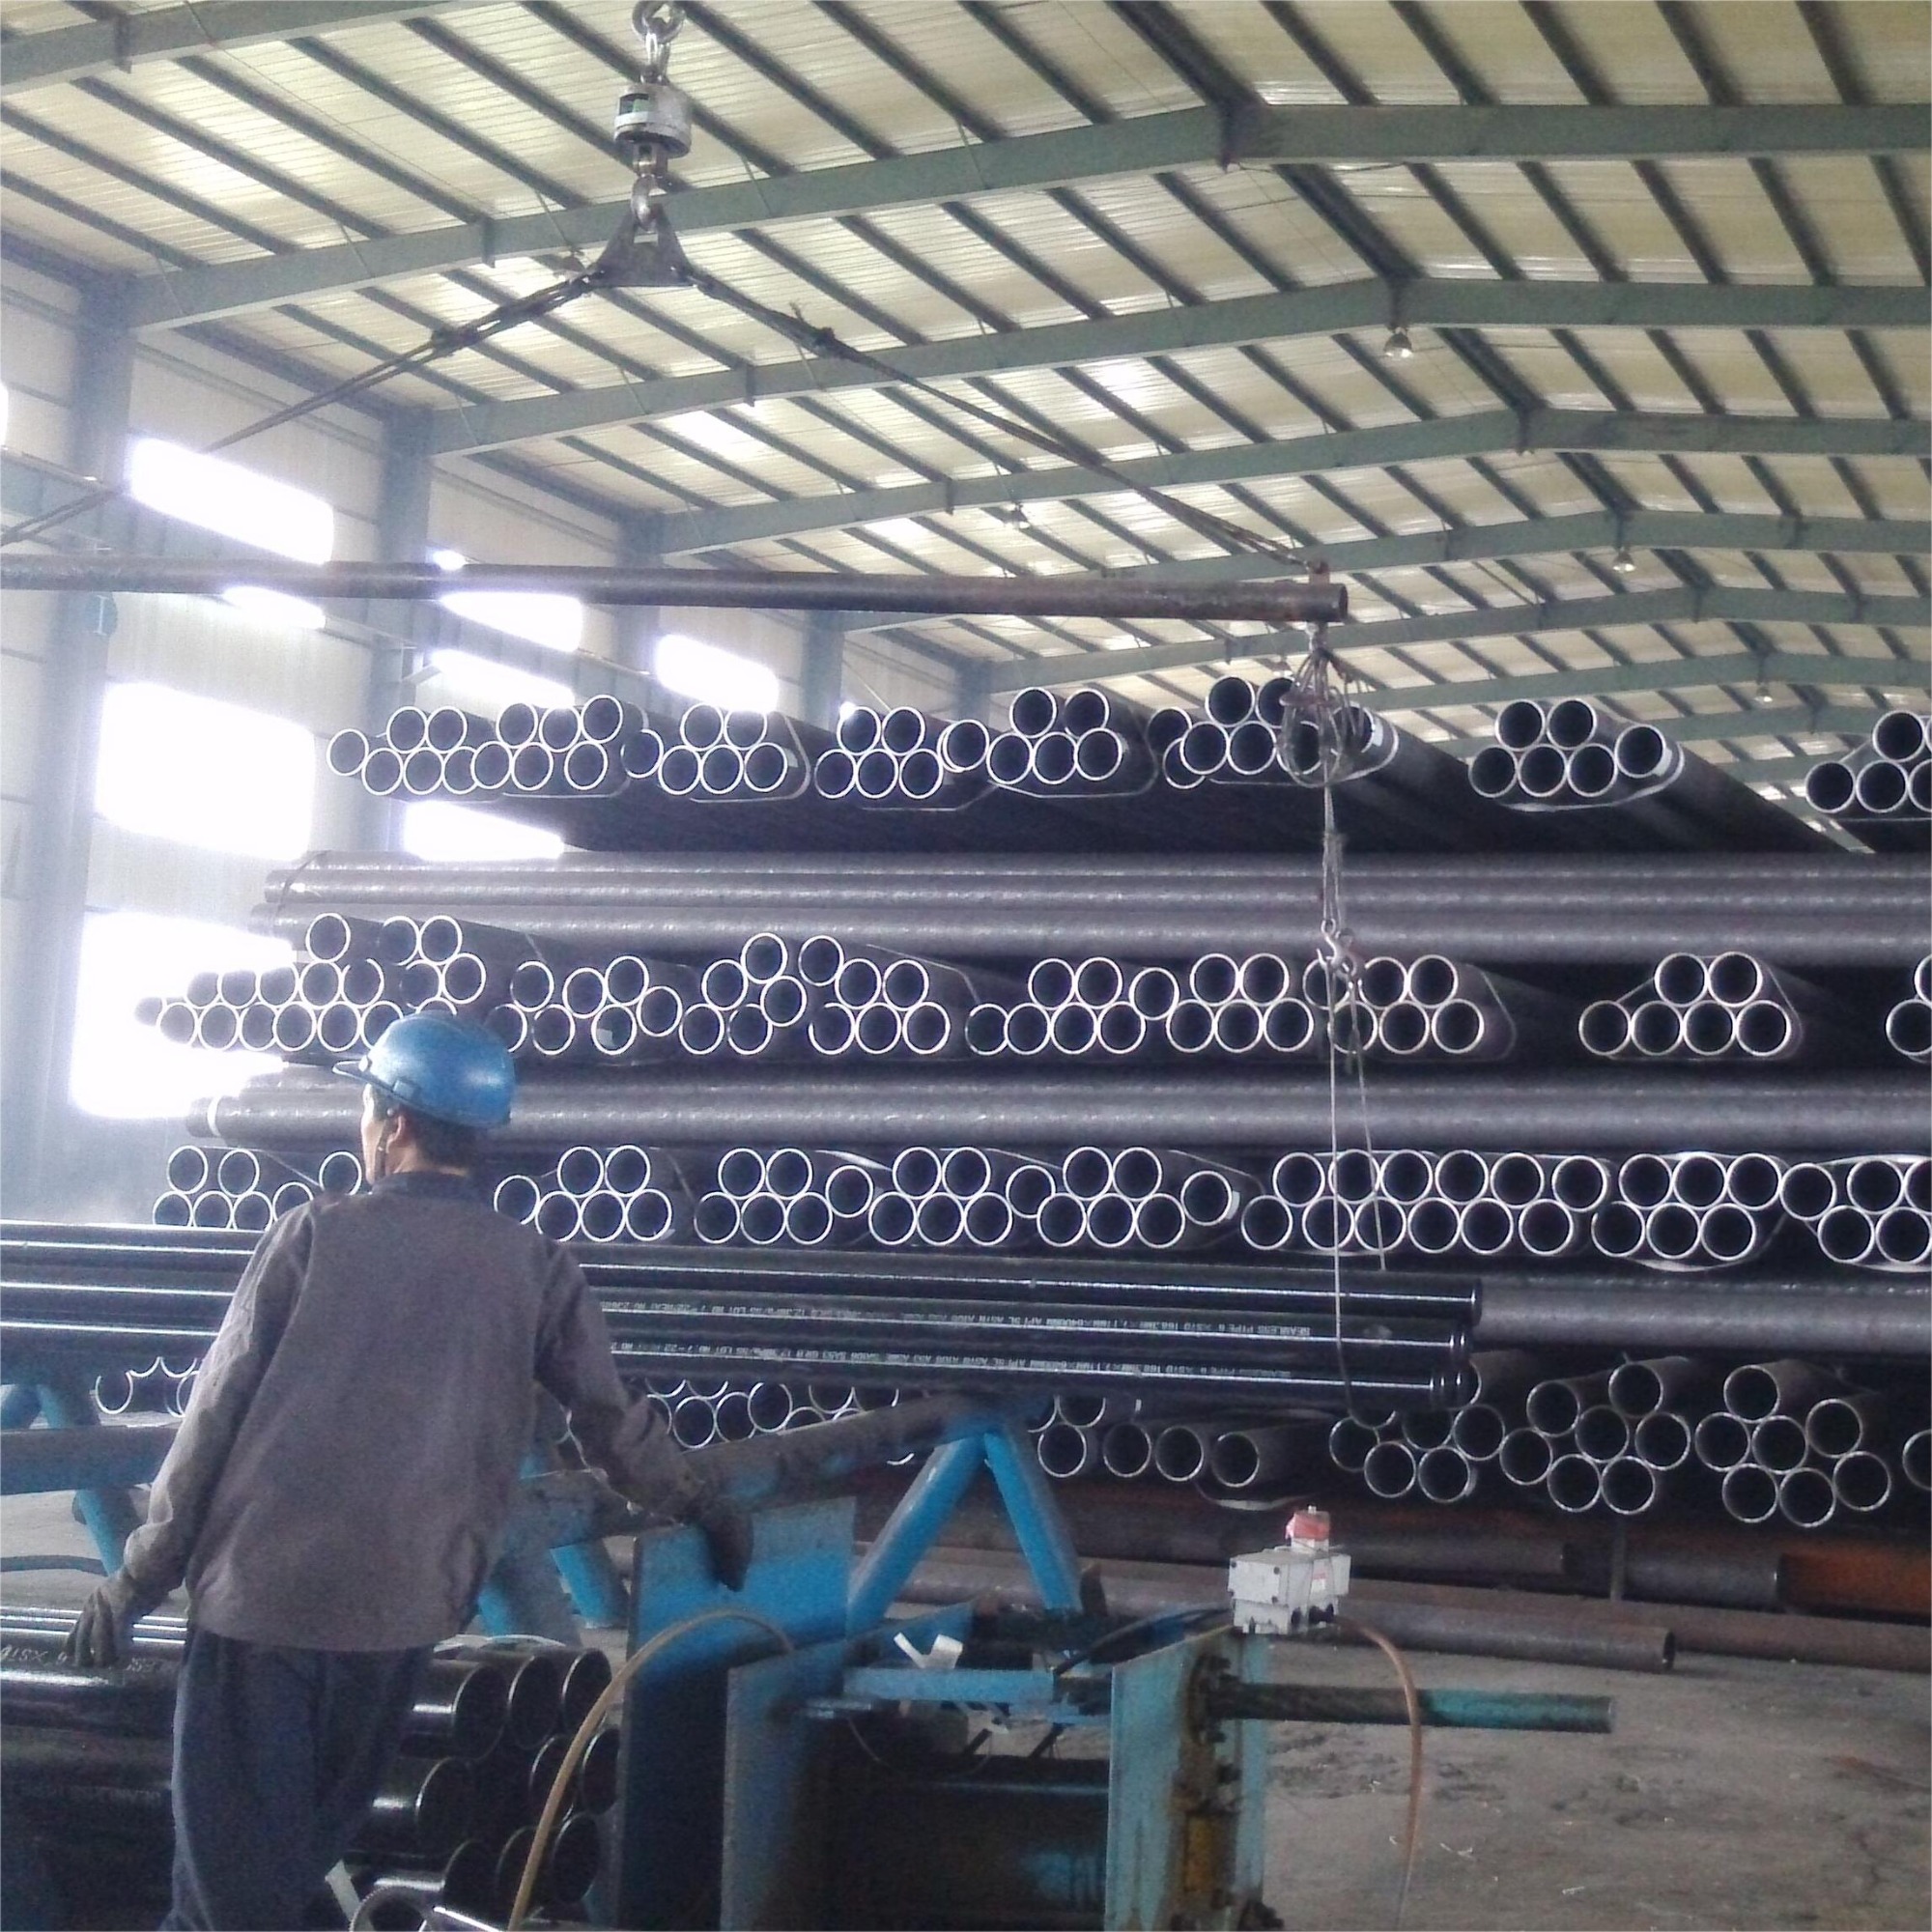 What are the cutting methods and precautions for API 5L X56 seamless steel pipe?